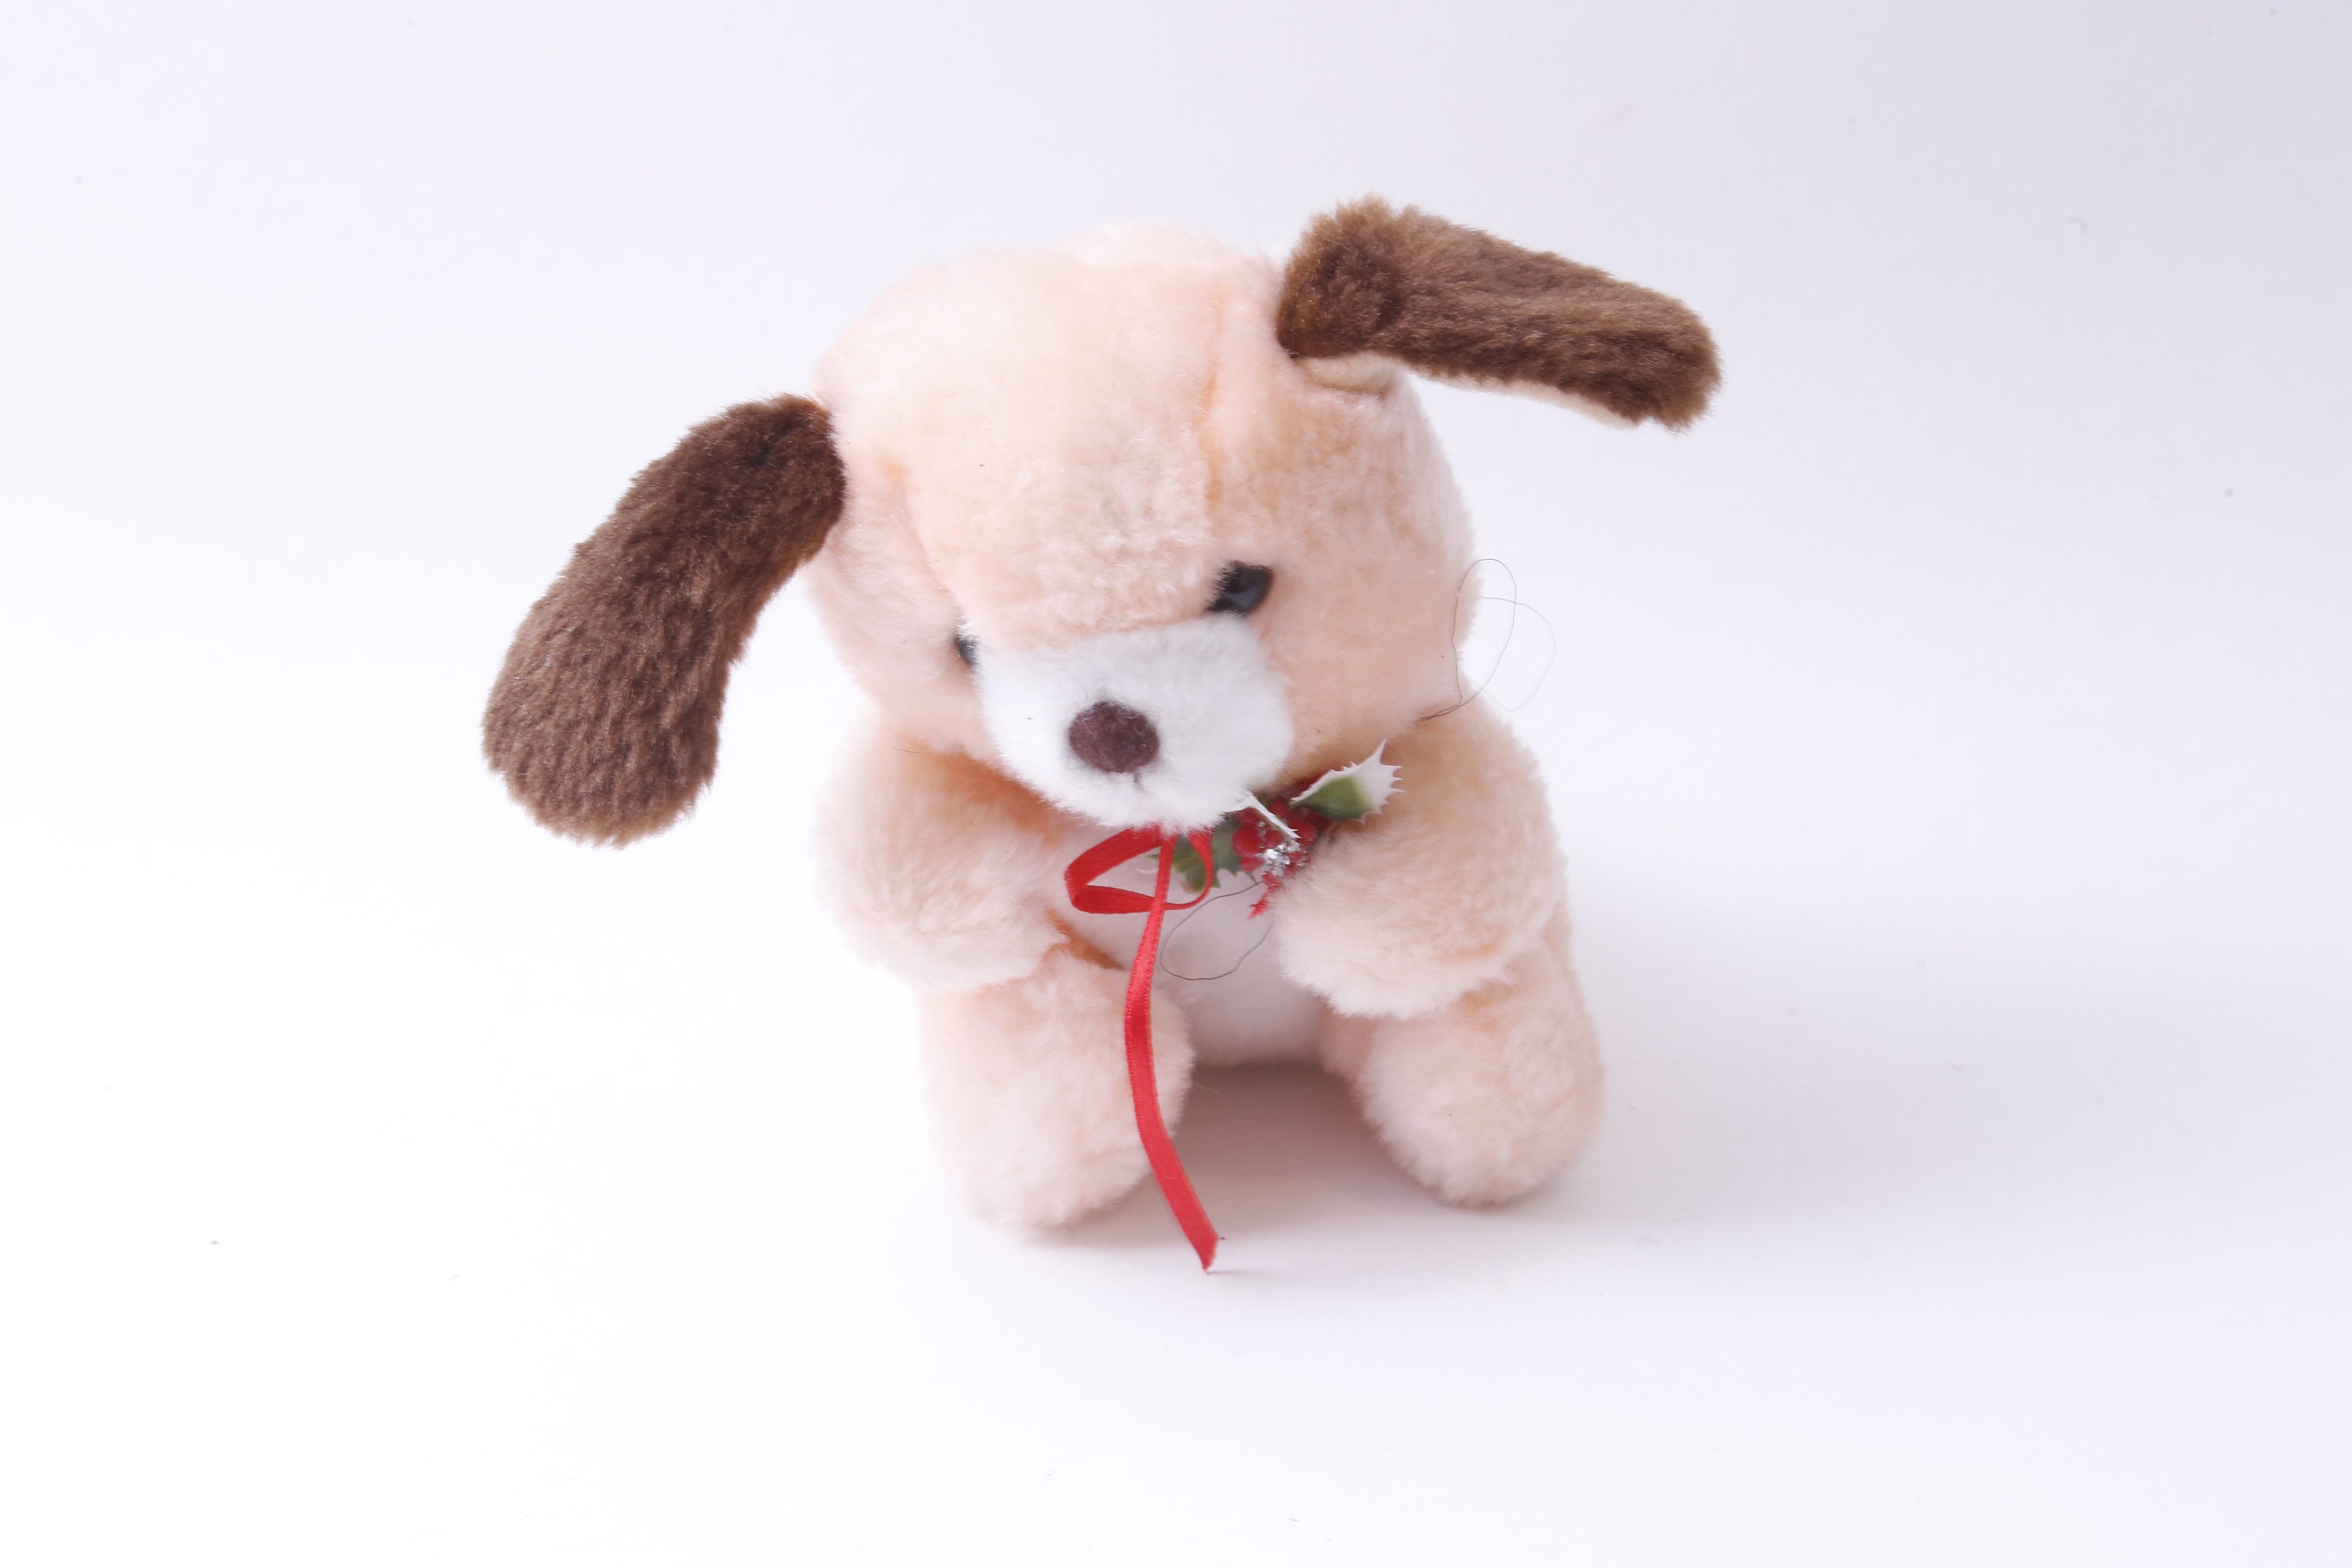 Plush Dog With Zip Jacket by Interpur 1980s Toy 